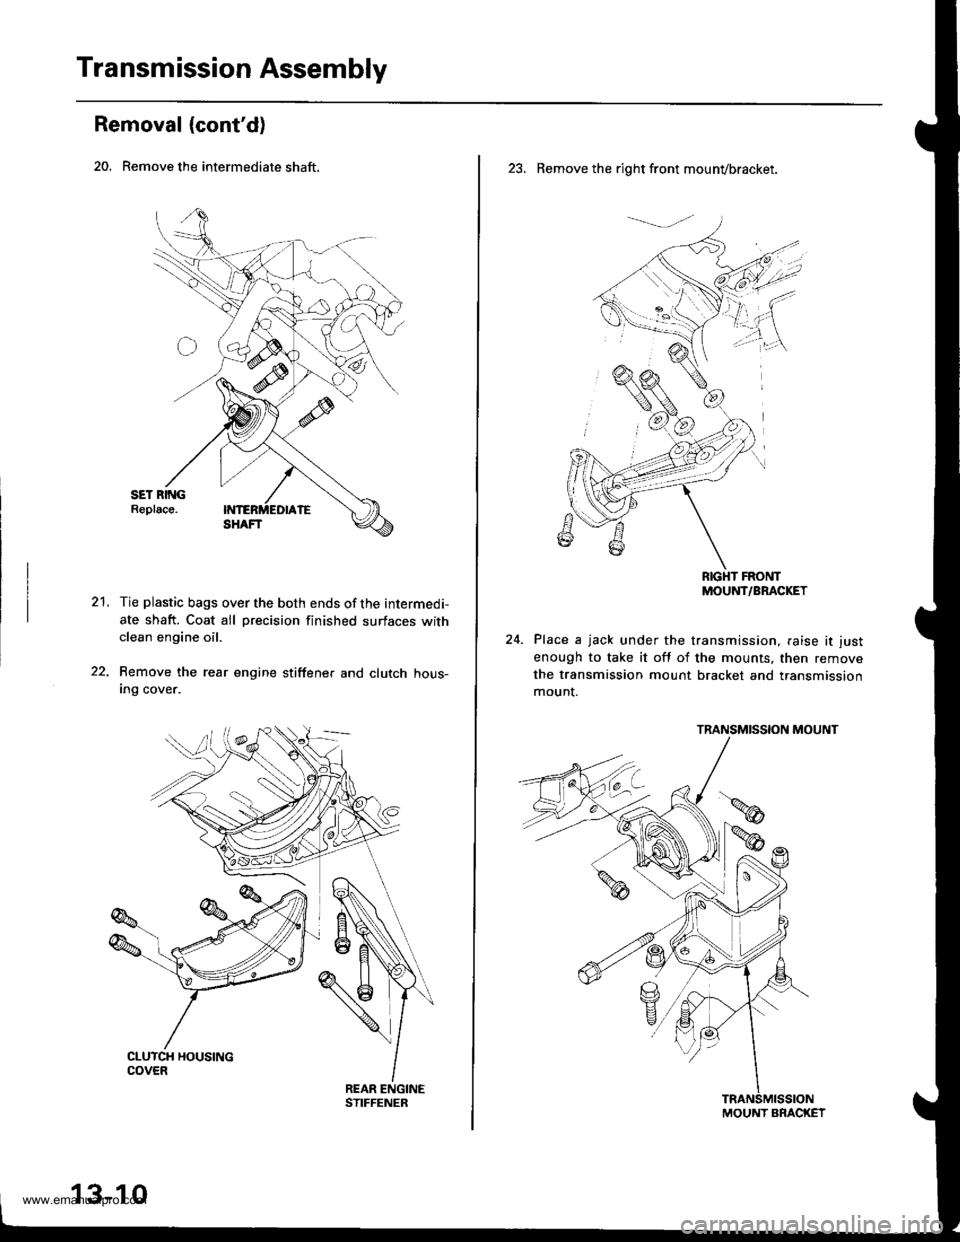 HONDA CR-V 1999 RD1-RD3 / 1.G Workshop Manual 
Transmission Assembly
Removal (contd)
20. Remove the intermediate shaft.
21.Tie plastic bags over the both ends of the intermedi-
ate shaft. Coat all precision finished surfaces withclean engine oil